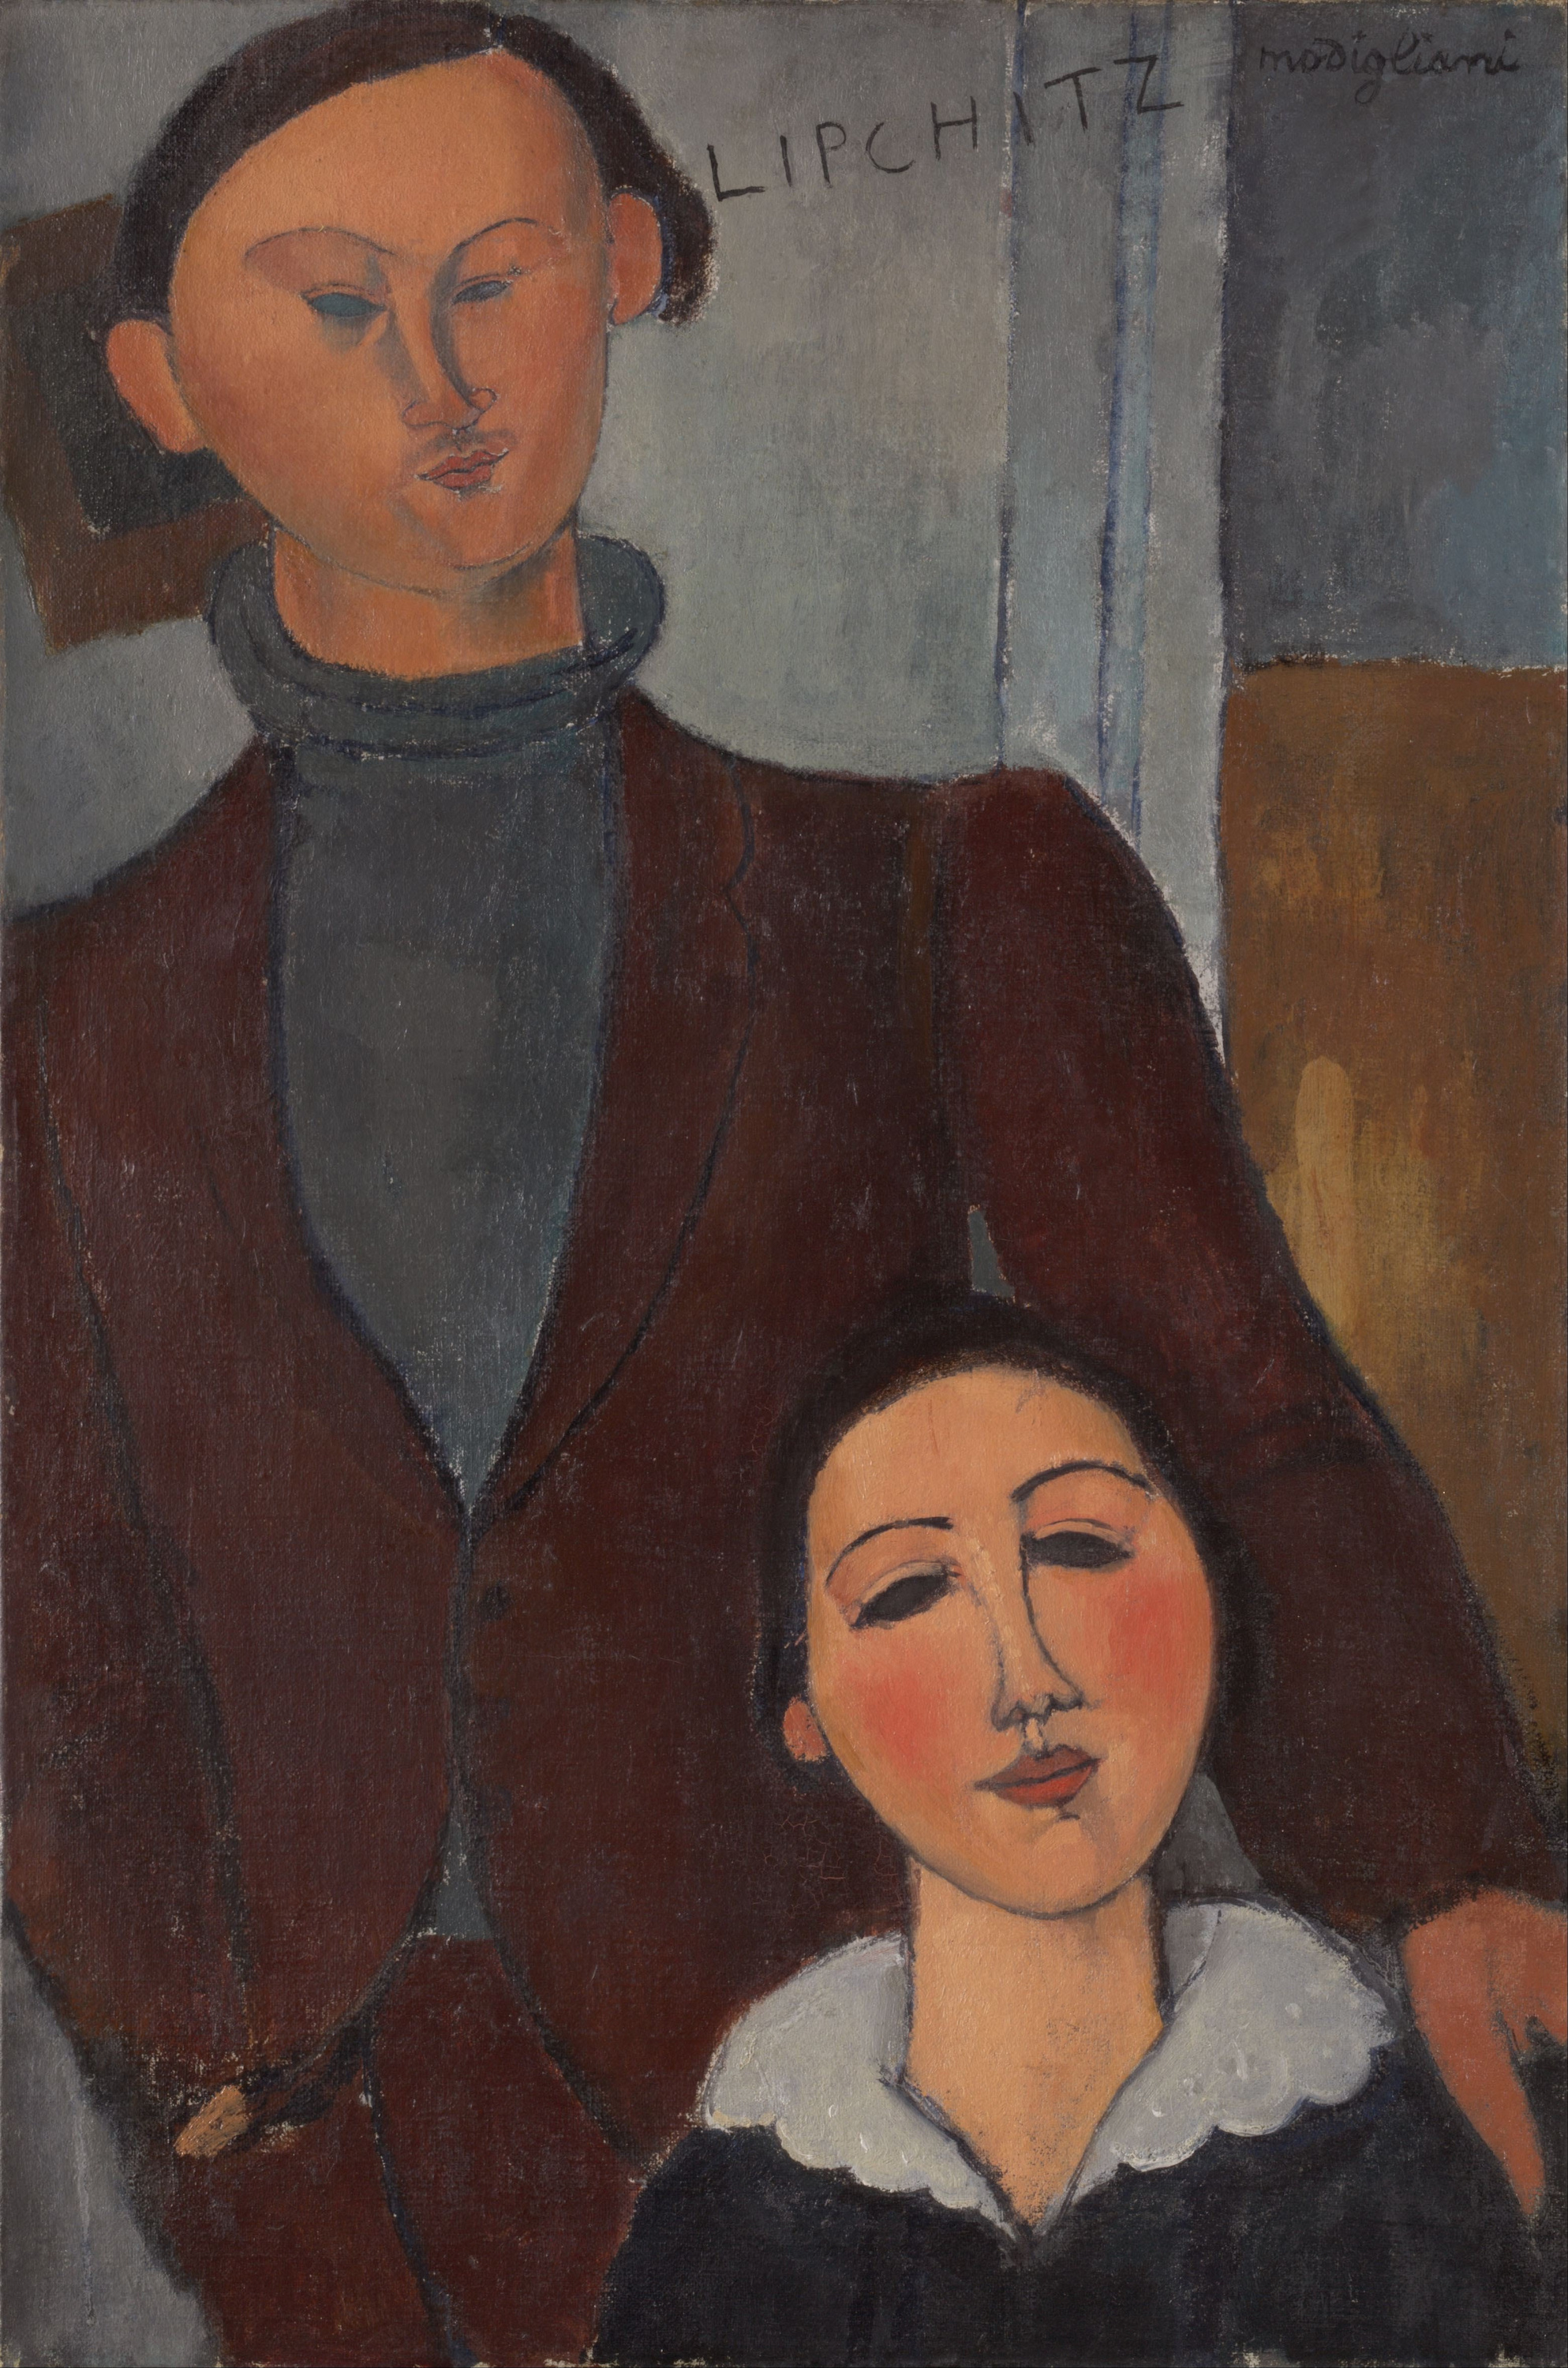 Jacques and Berthe Lipchitz by Amedeo Modigliani - 1916 - 81 × 54 cm Art Institute of Chicago